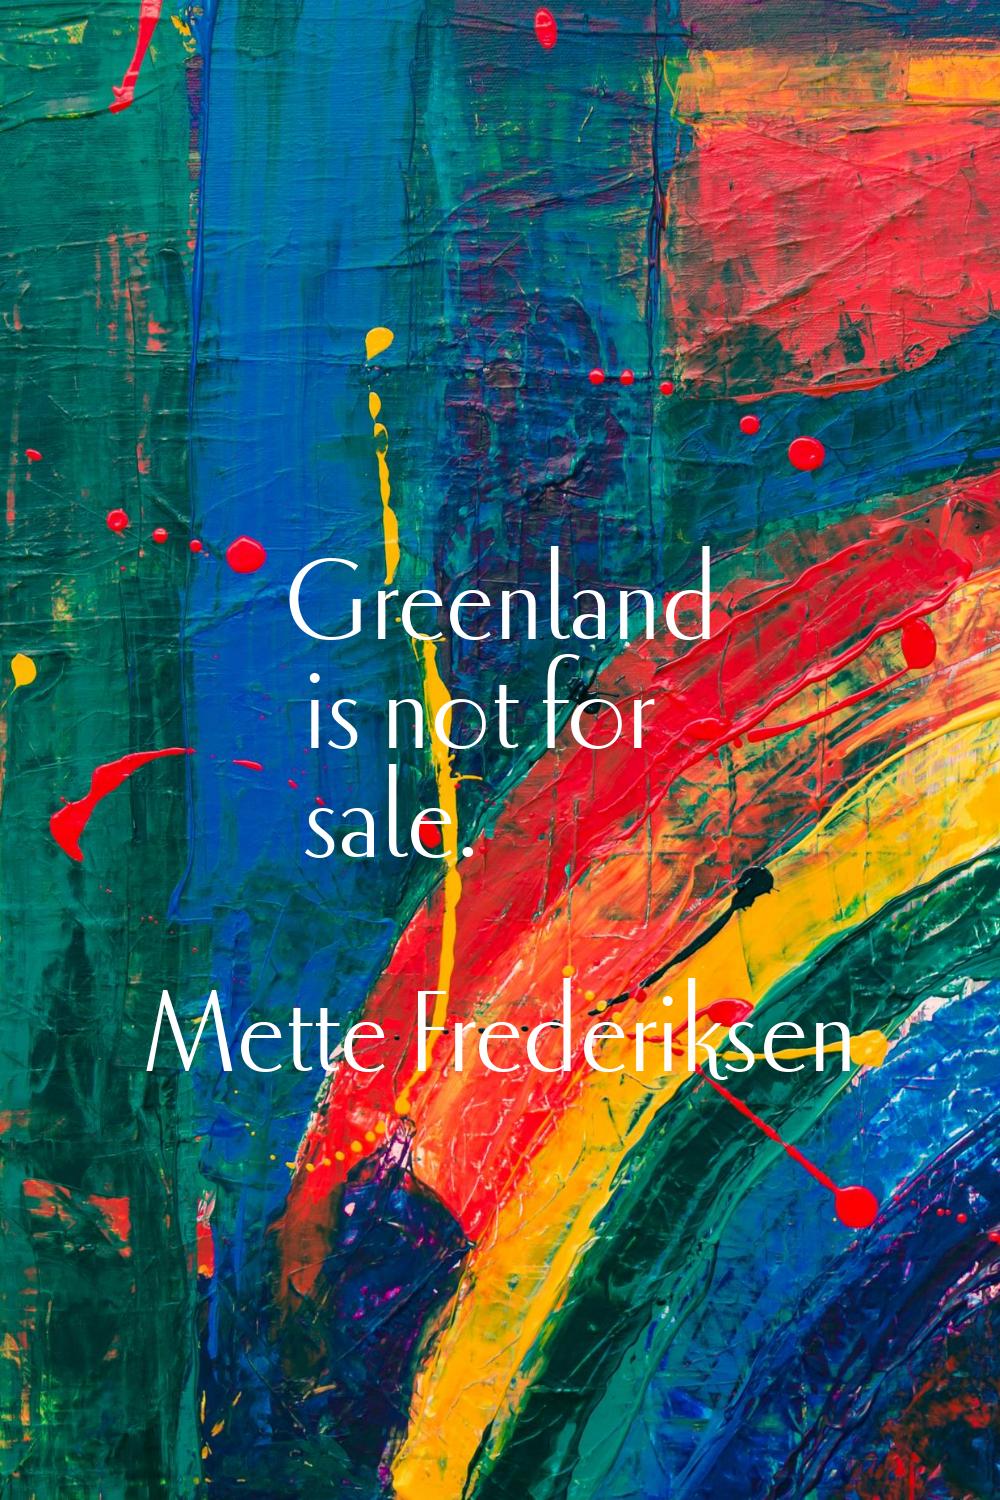 Greenland is not for sale.